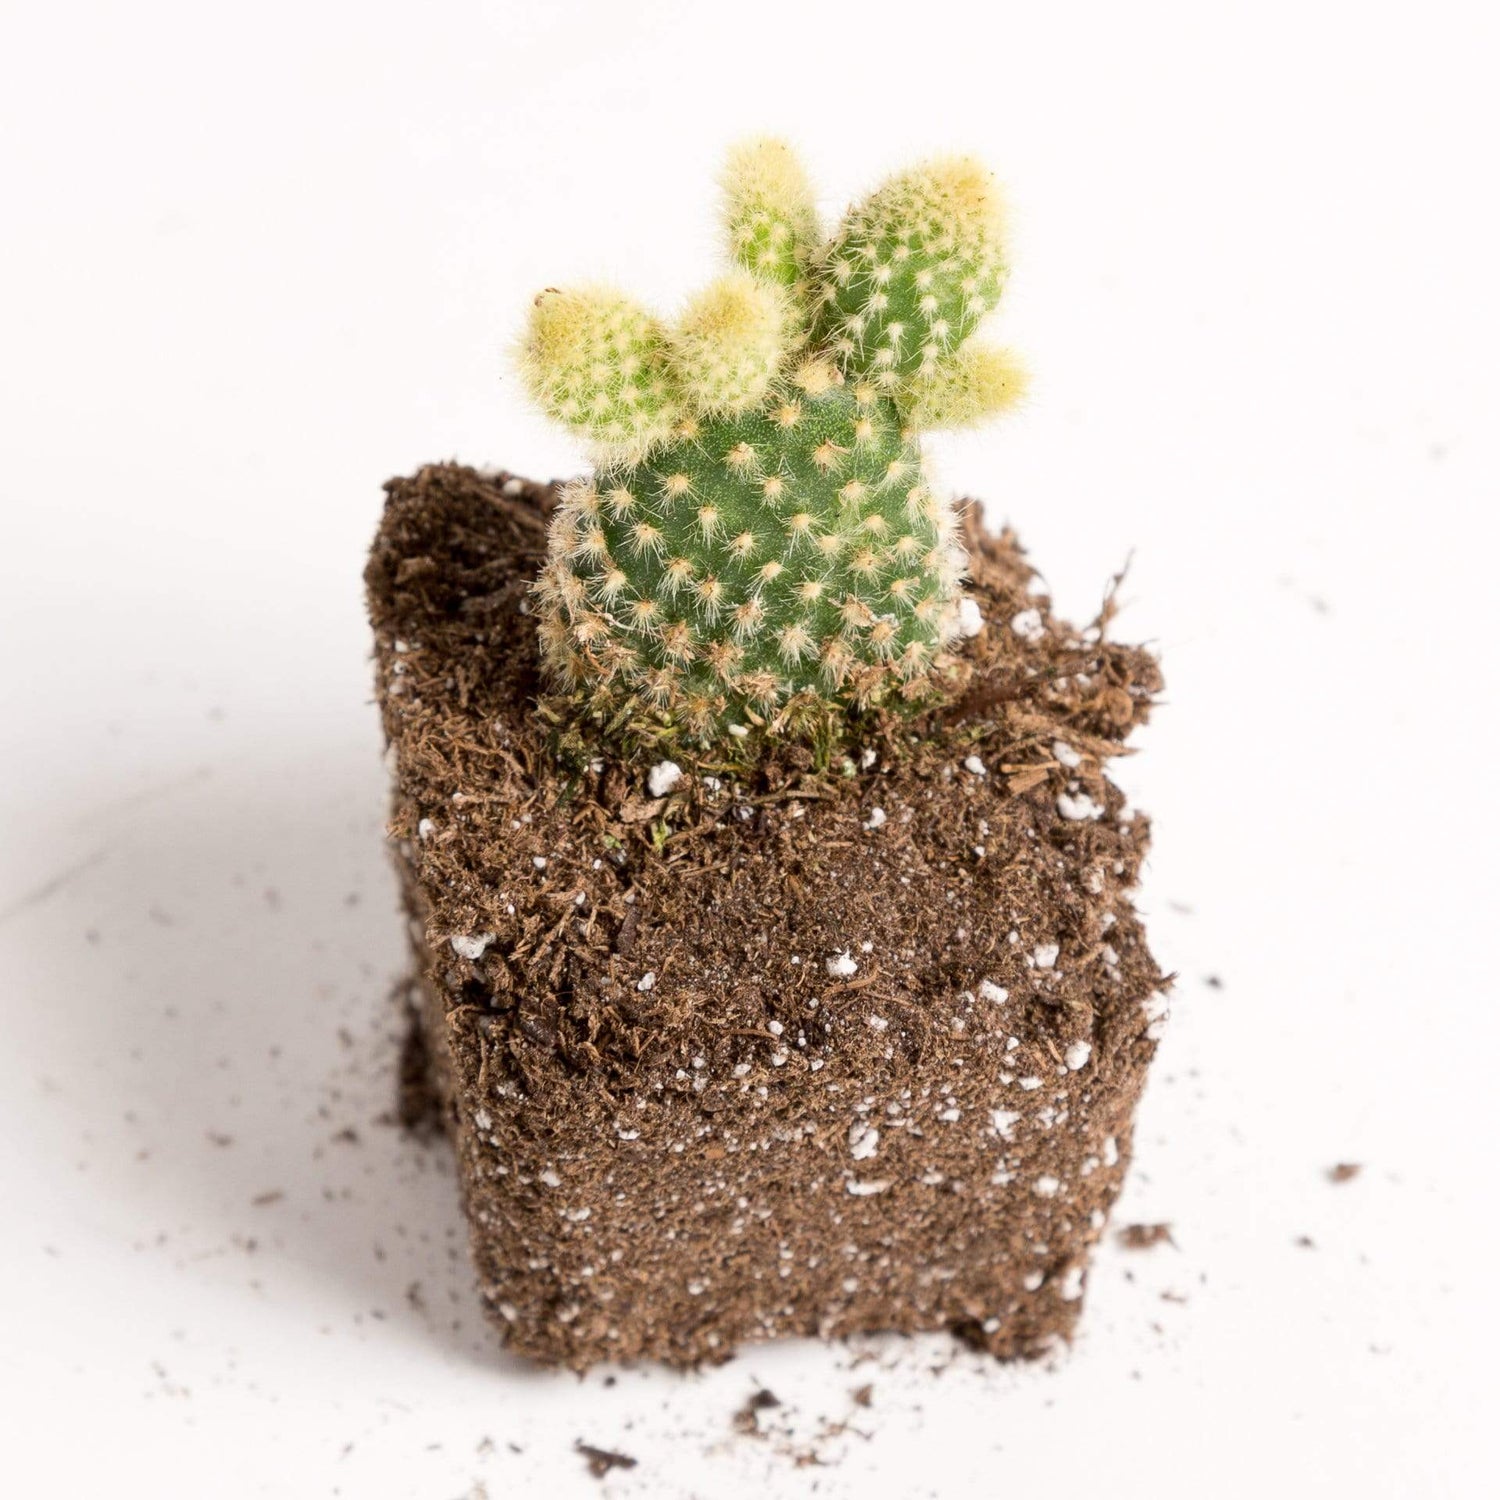 Urban Sprouts Plant Cactus 'Bunny Ear - Yellow'